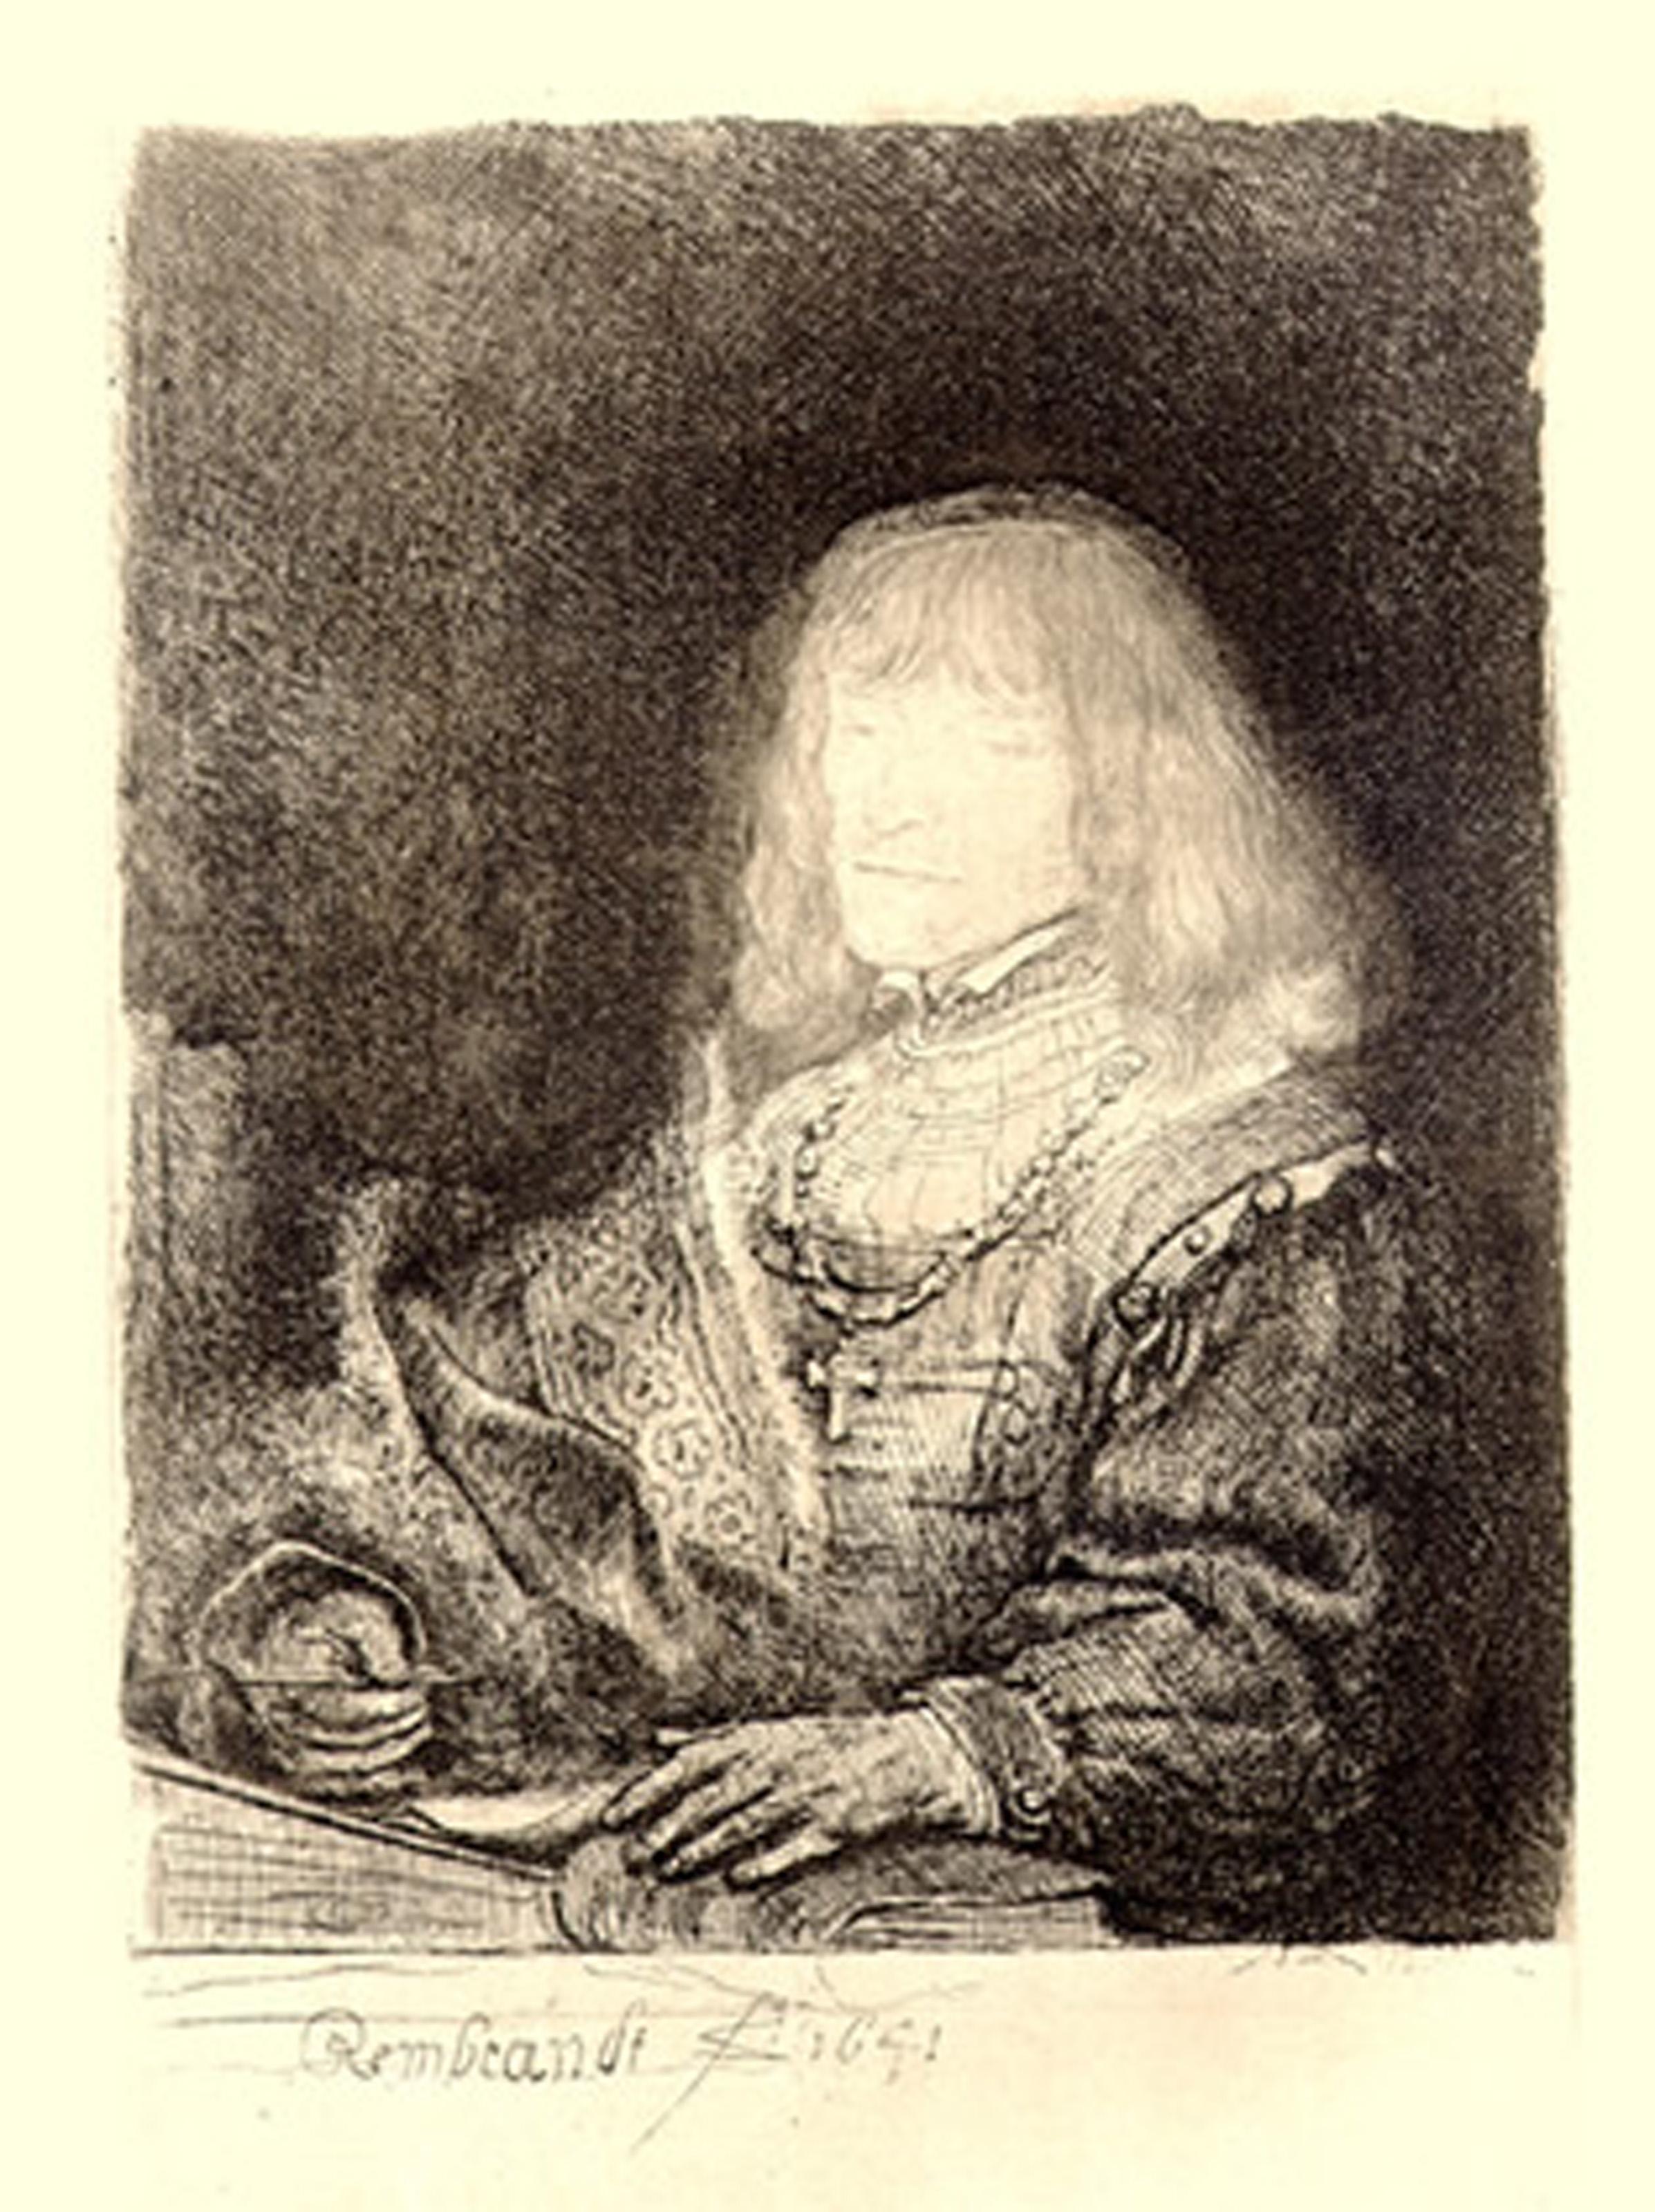  Rembrandt van Rijn, After by Amand Durand, Dutch (1606 - 1669) - Man at a Desk Wearing a Cross and Chain, Year: Of Original 1641, Medium: Etching, Image Size: 6.25 x 4 inches, Size: 14  x 10.5 in. (35.56  x 26.67 cm), Printer: Amand Durand,